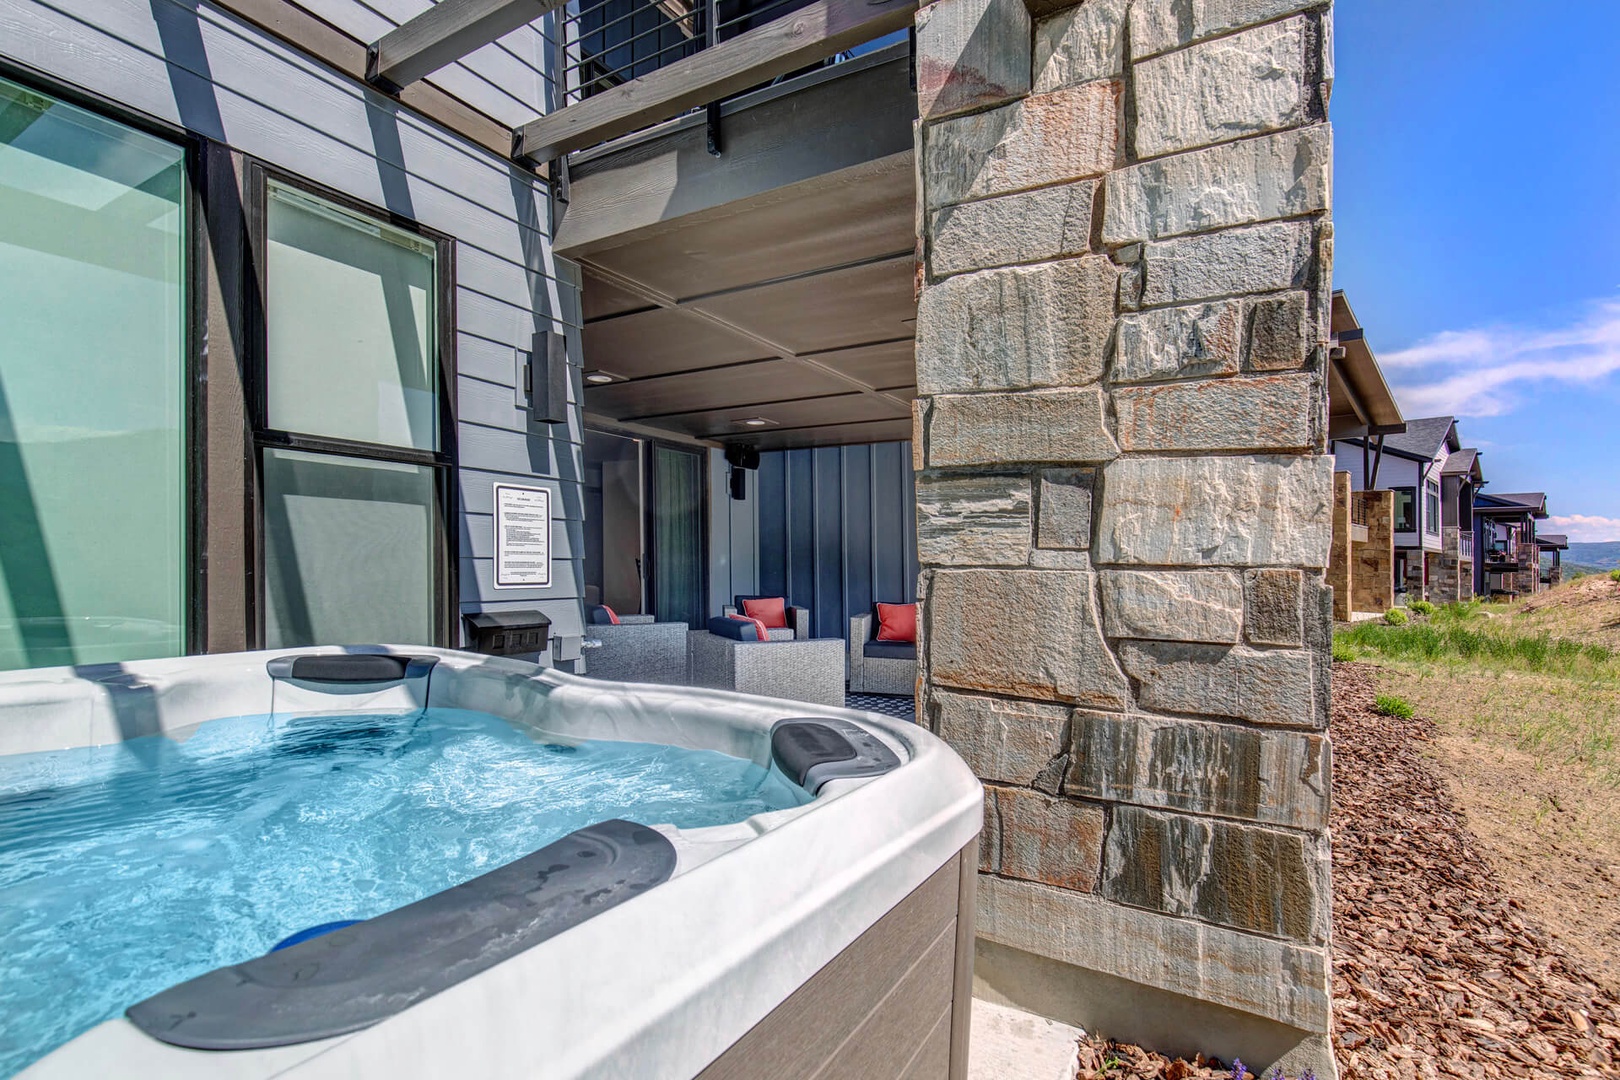 Private Hot Tub - Enjoy an evening outdoors in the summer or winter!